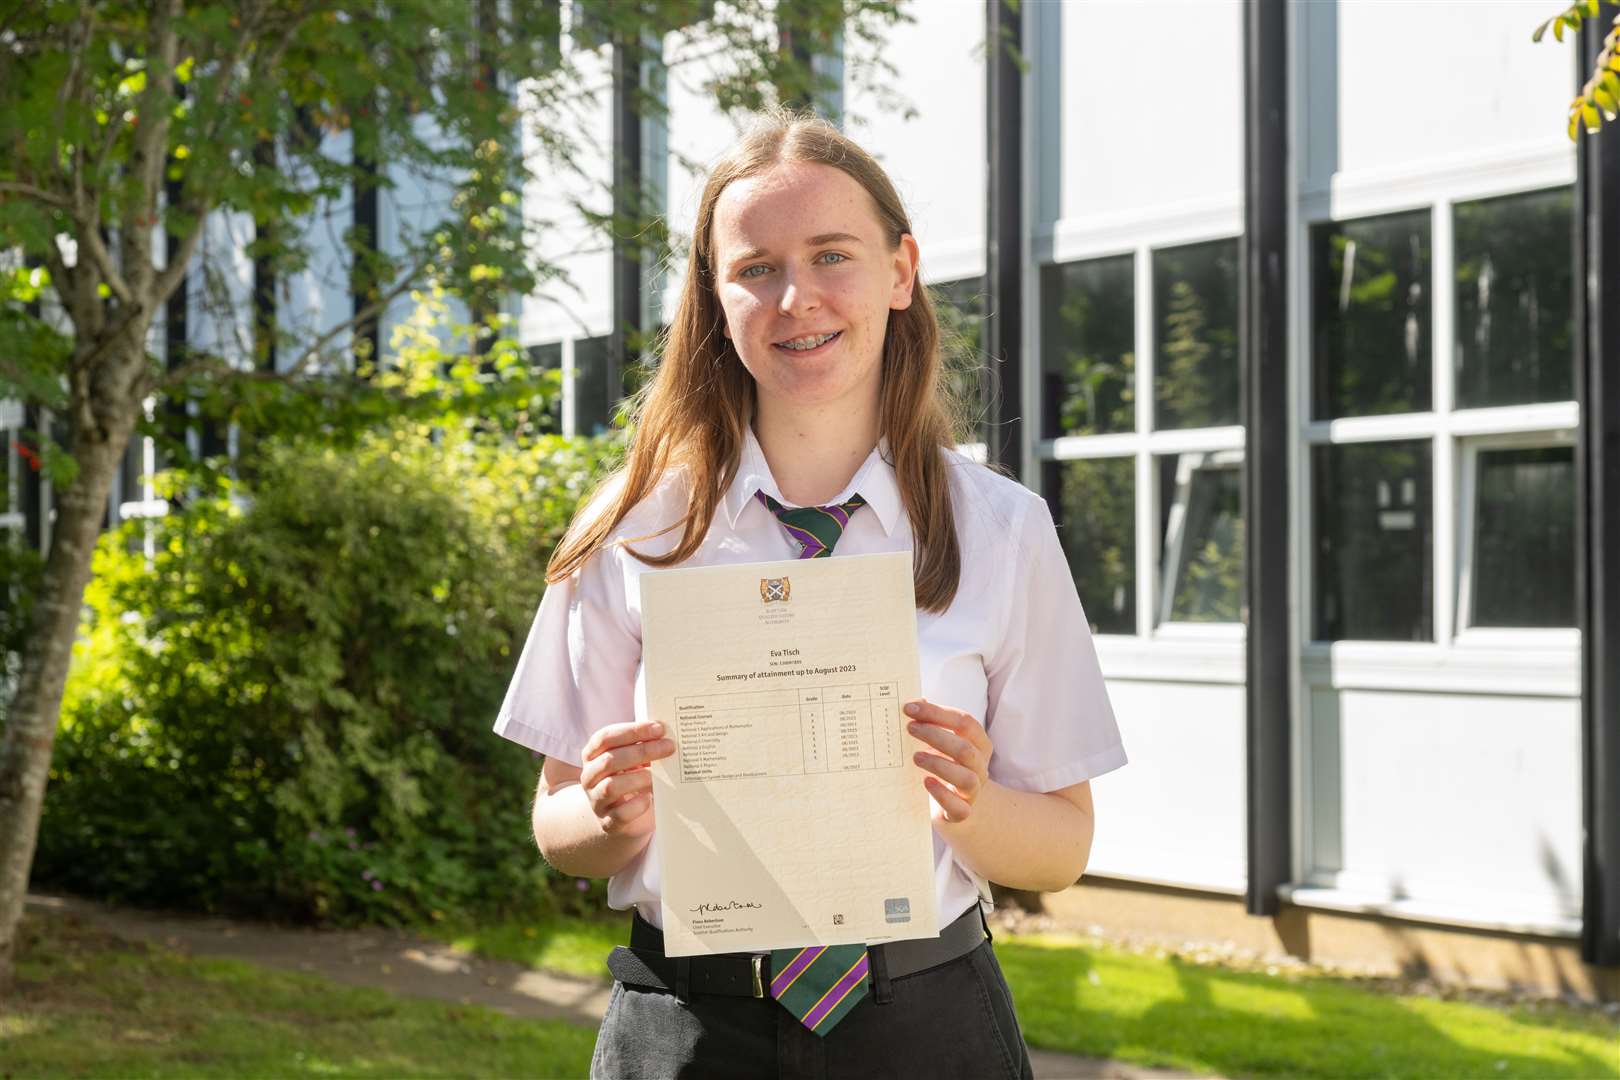 S4 student Eva Tisch achieved 7 As at Nat 5 and 1 A at Higher.